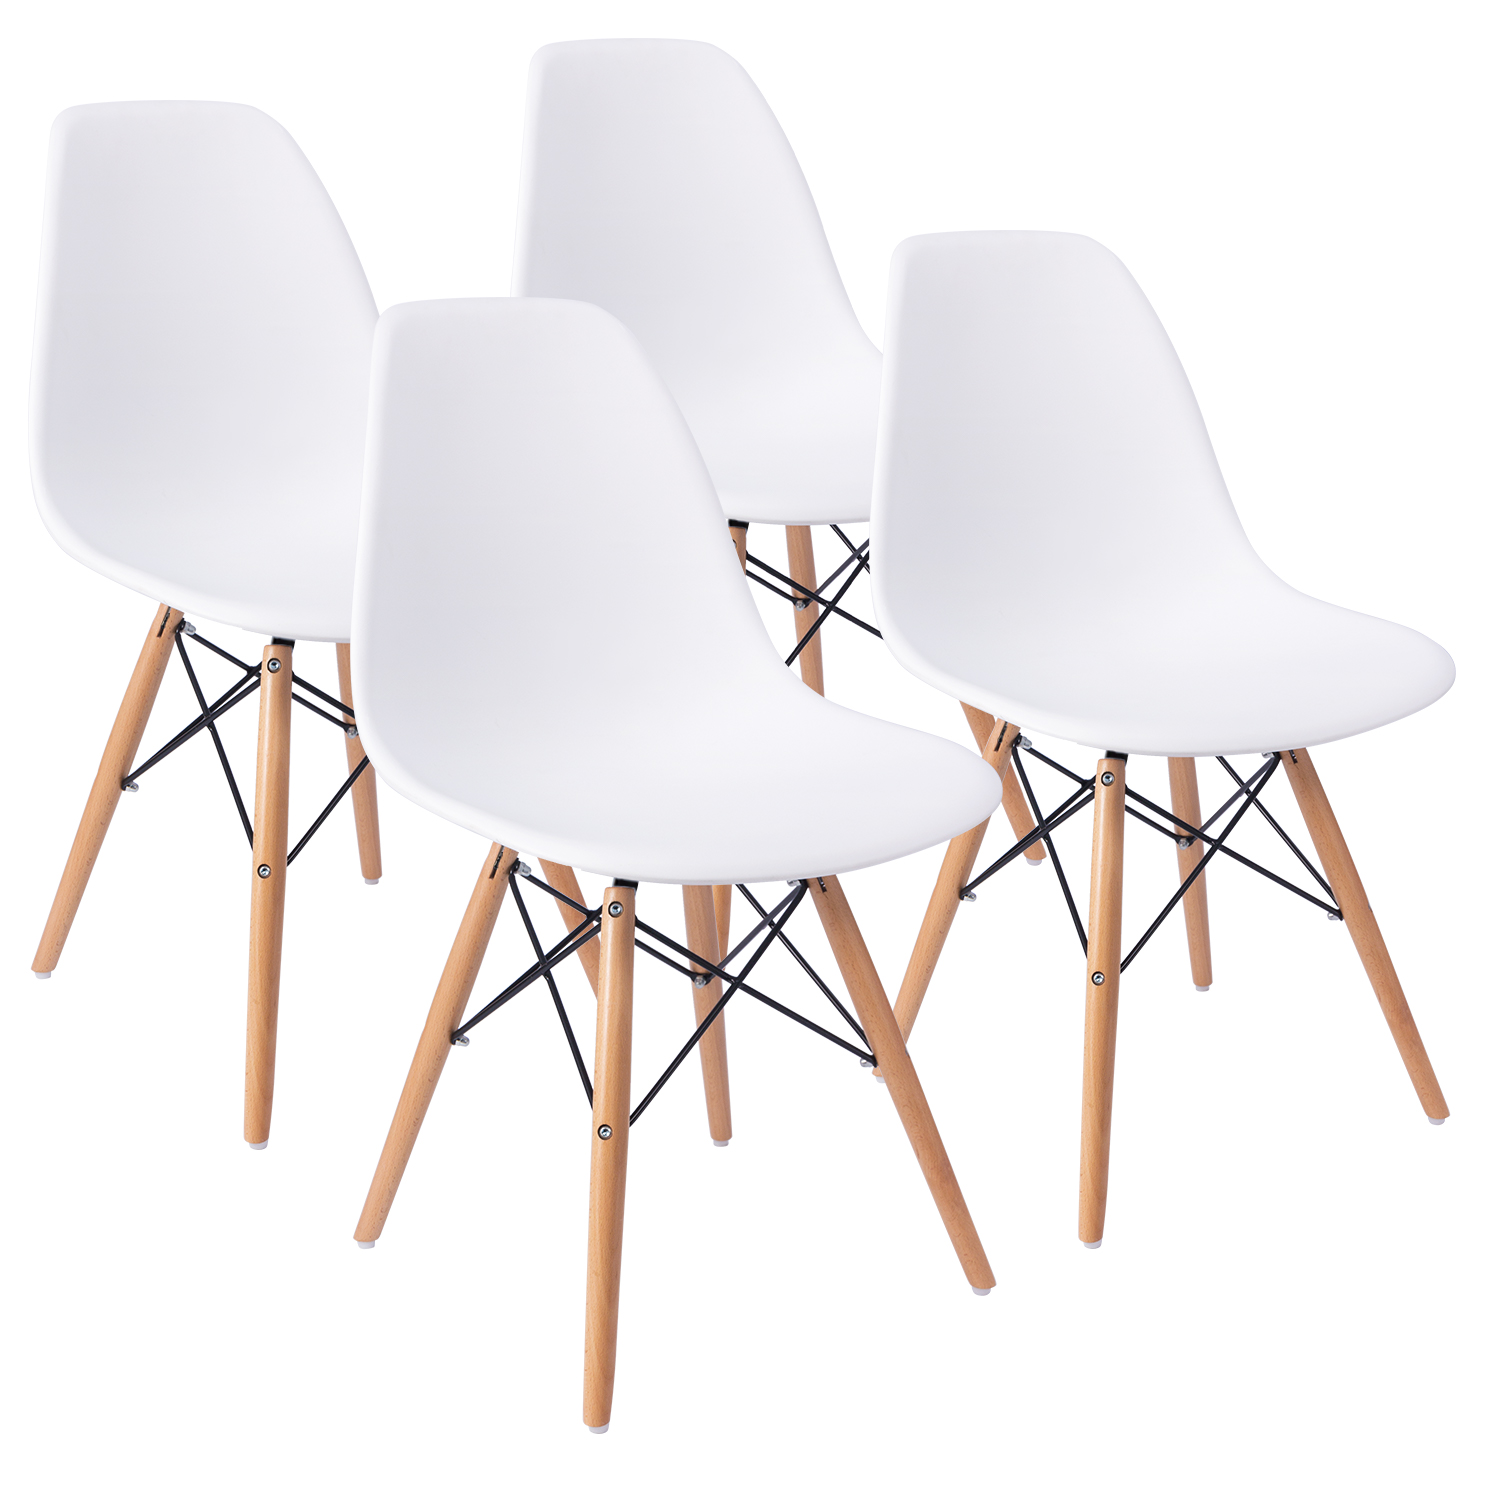 Lacoo Pre-Assembled Mid Century Modern Dining Chairs, Set of 4, Multiple Colors - image 5 of 8